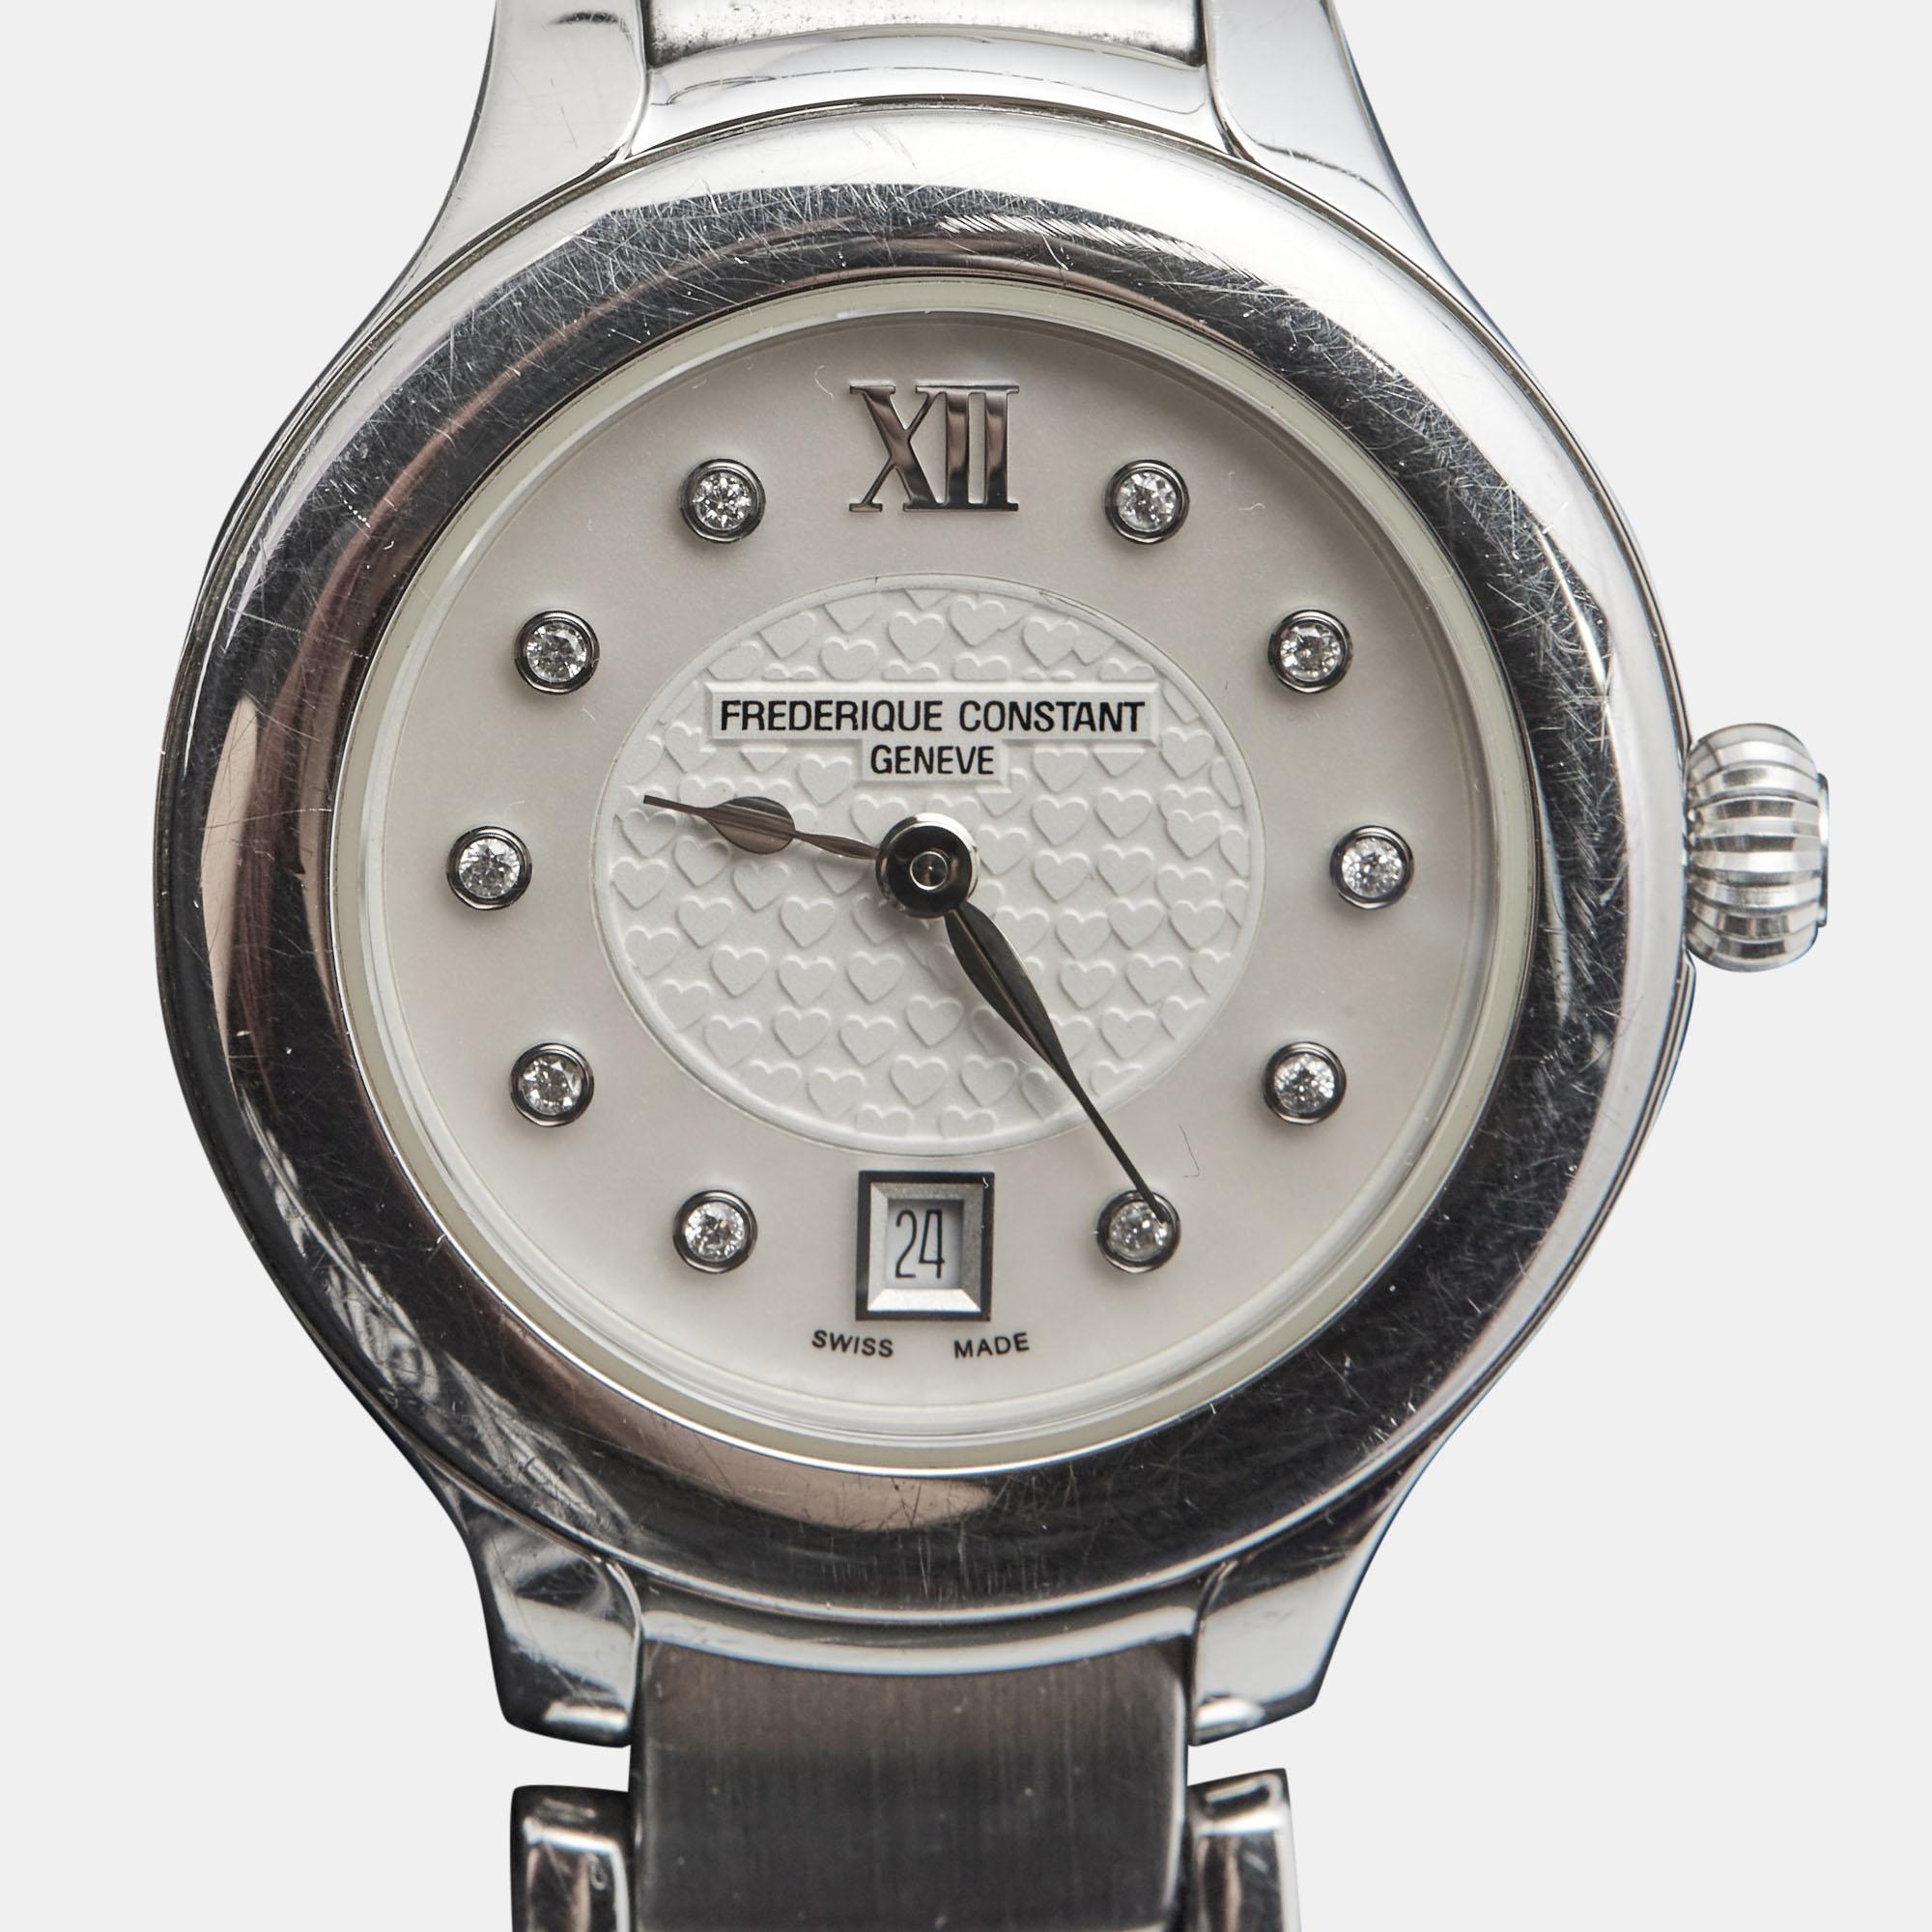 Uncut Frederique Constant Mother Of Pearl Stainless Diamond Delight Wristwatch 31 mm